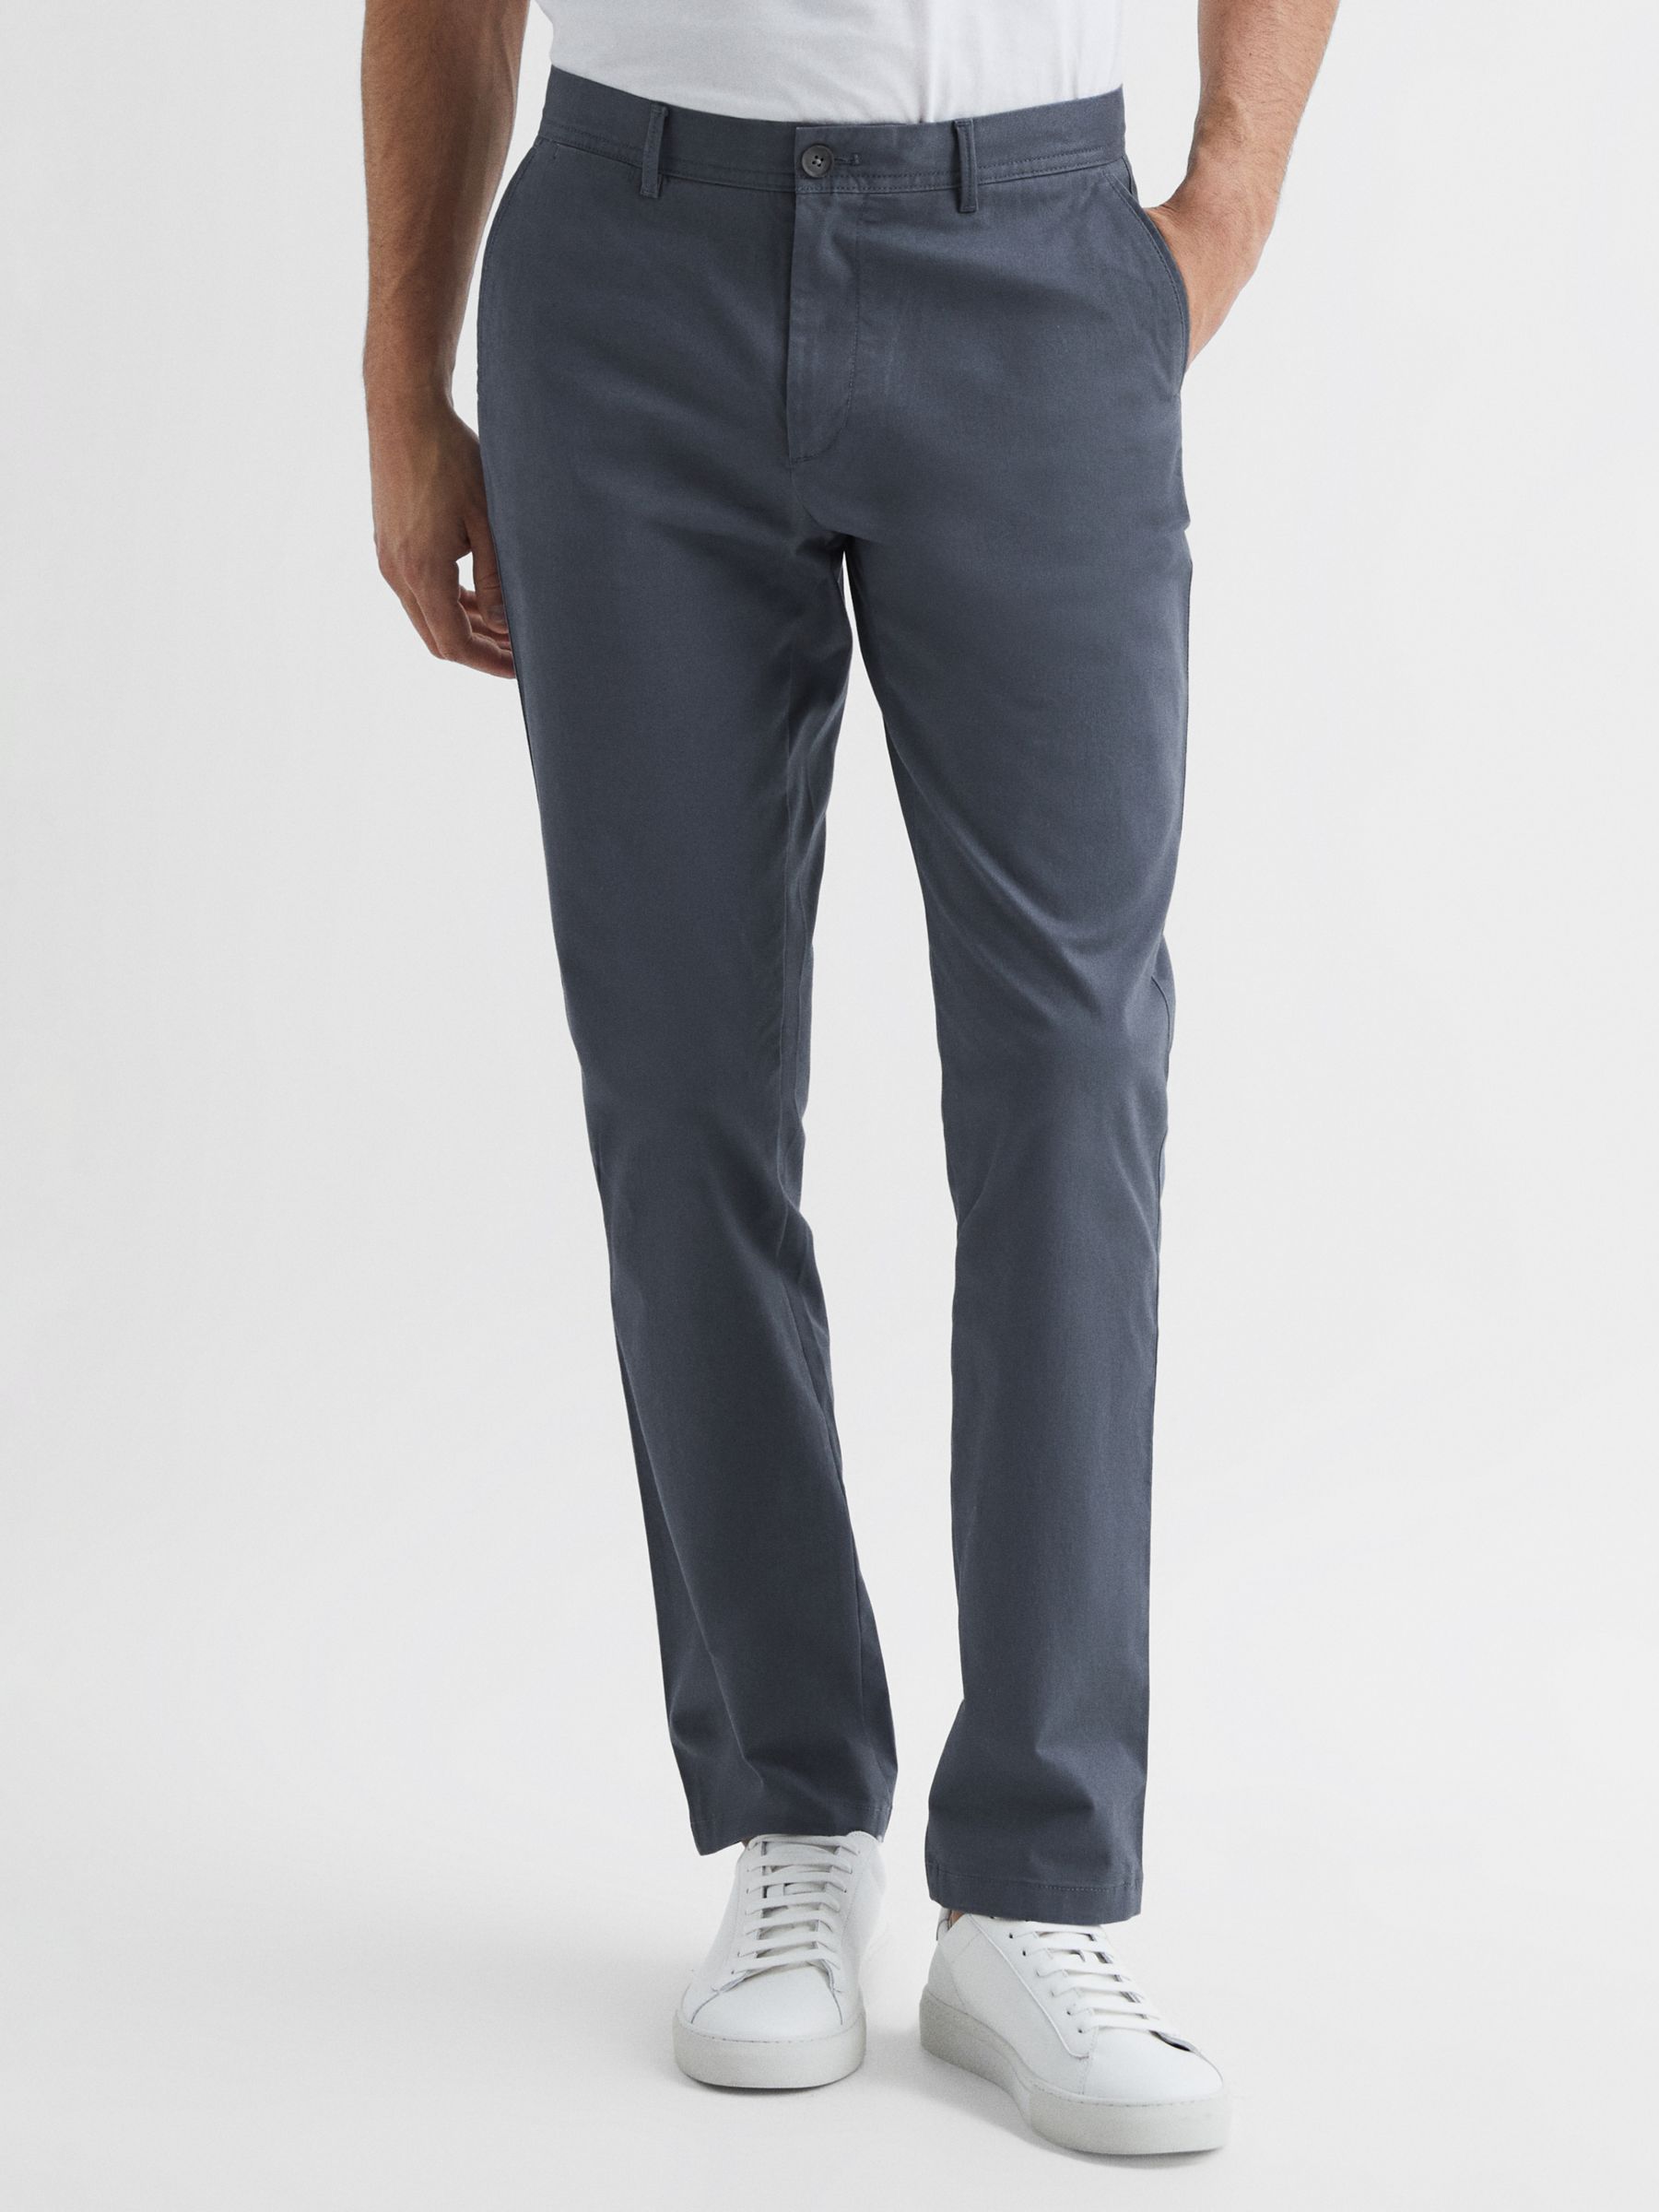 Reiss Pitch Slim Fit Stretch Cotton Chino Trousers, Airforce Blue, 30R